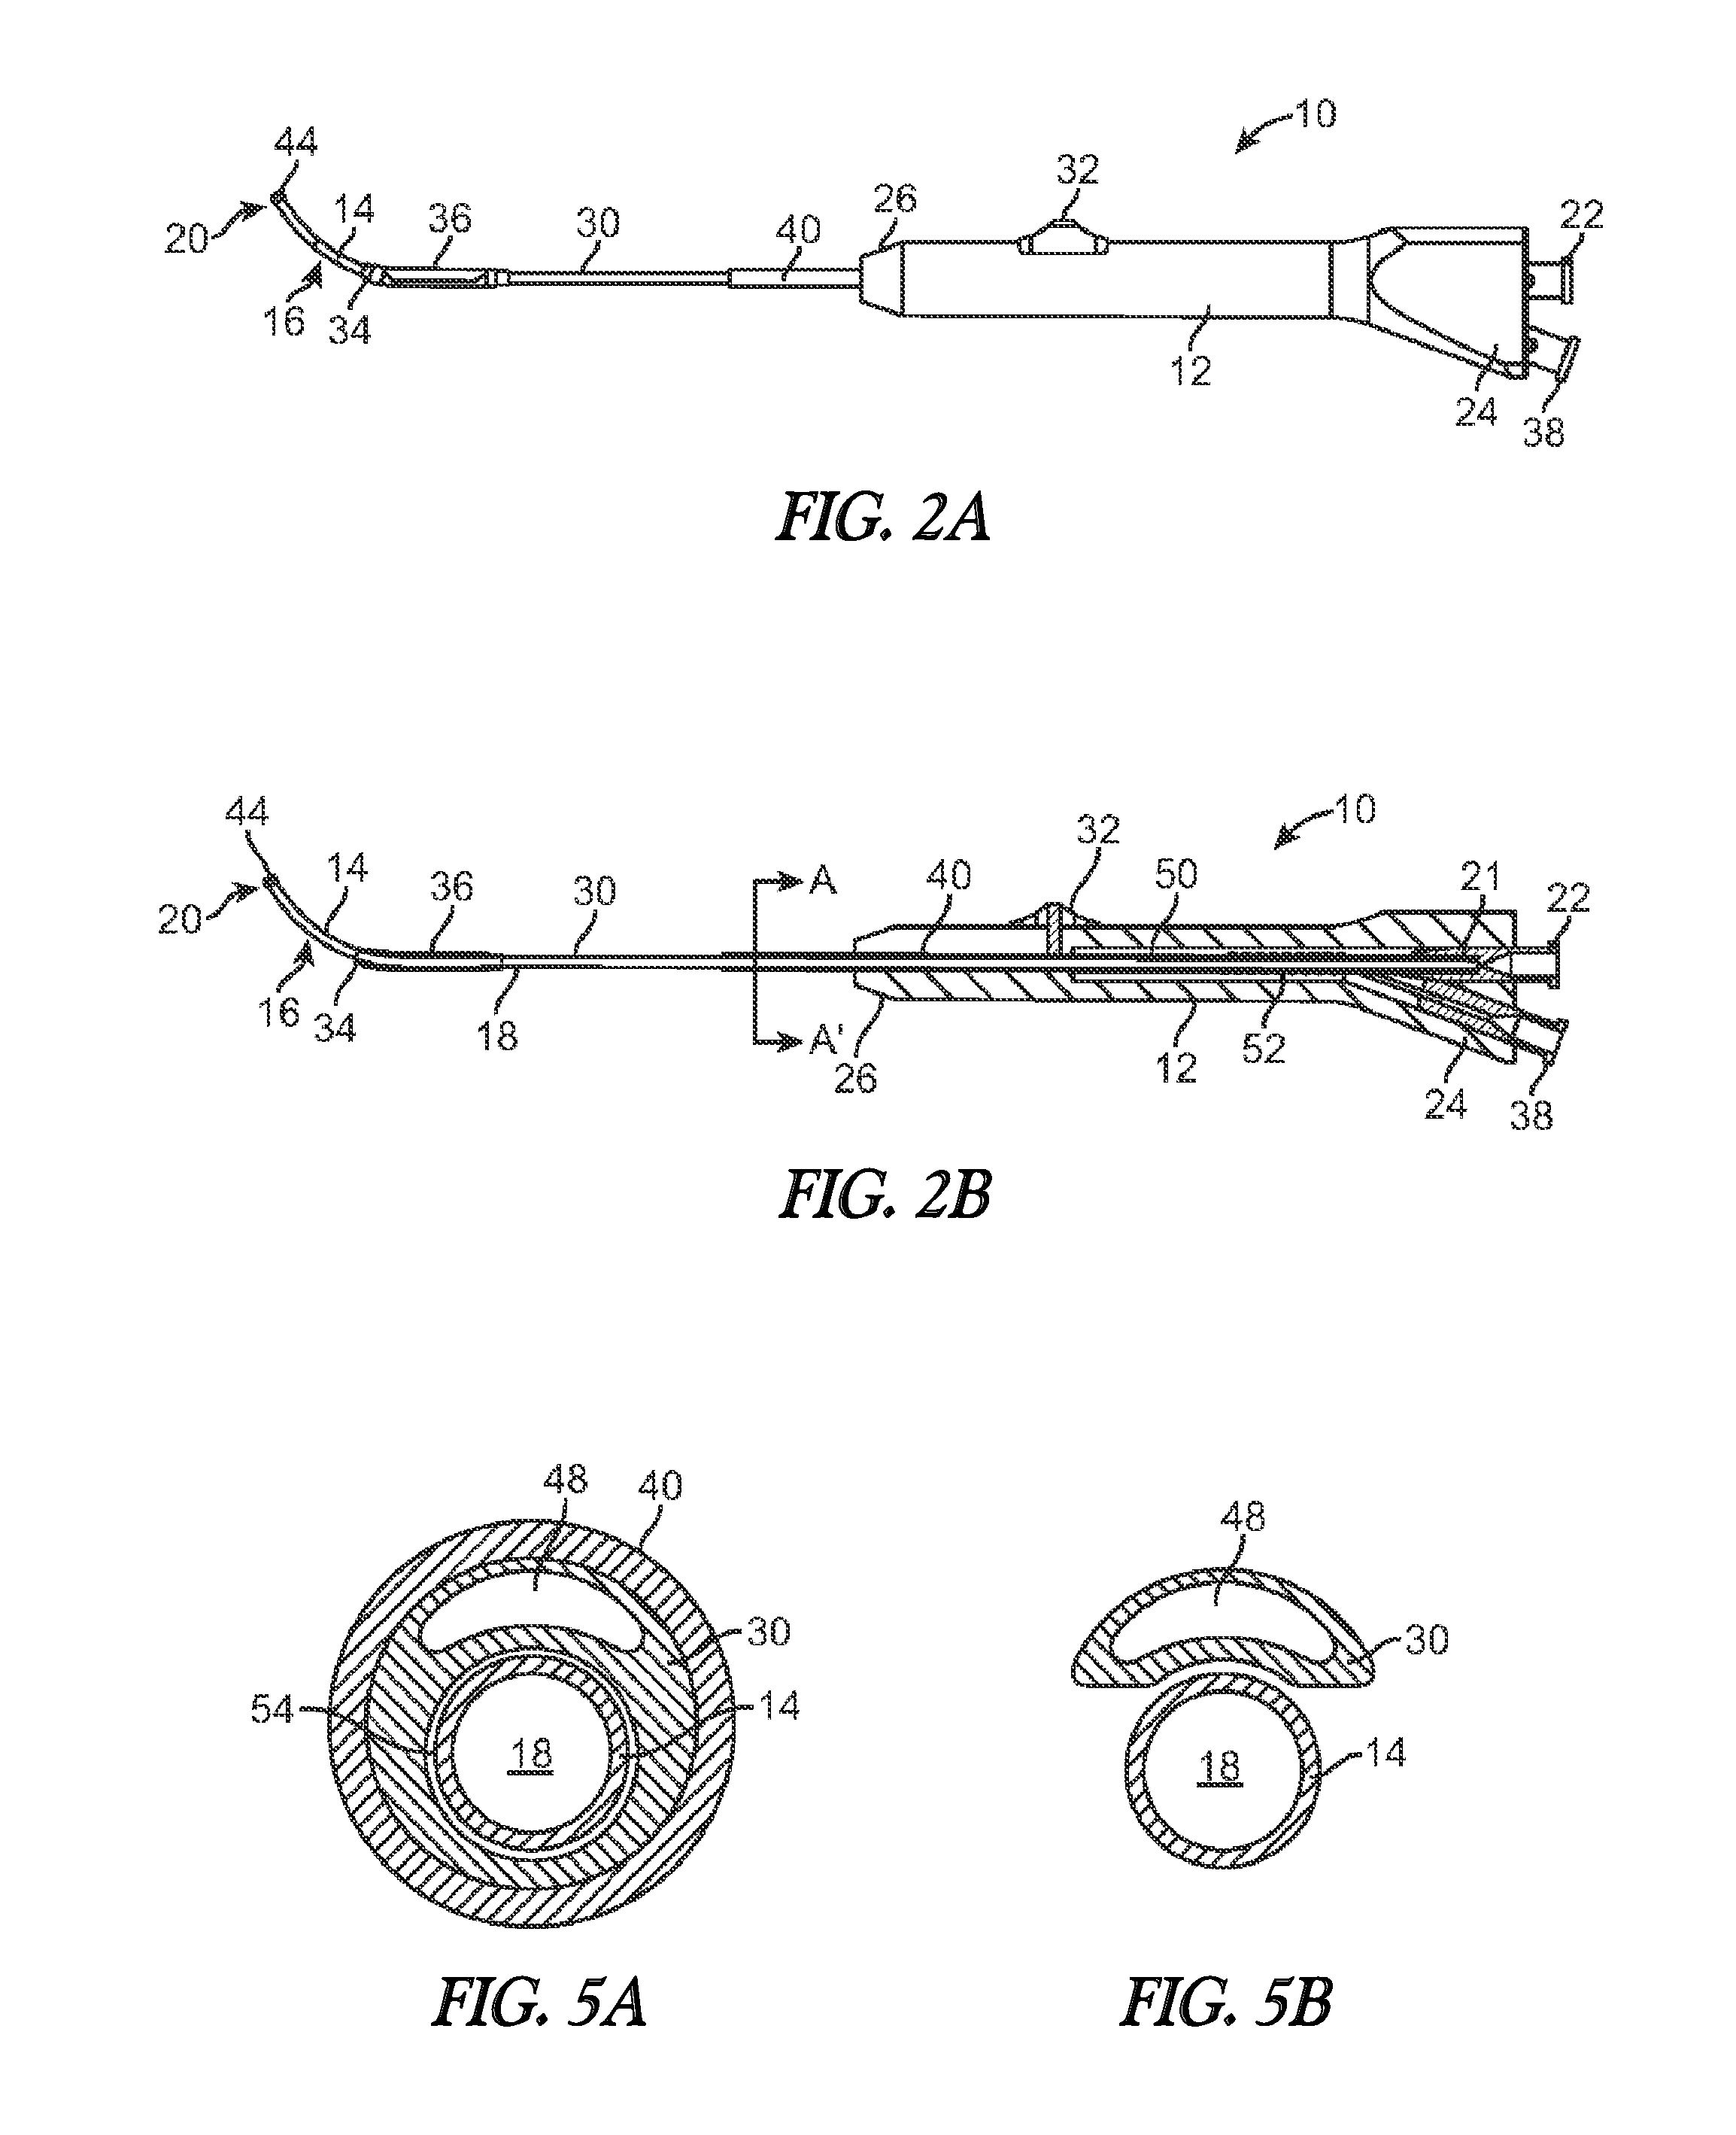 Method and articles for treating the sinus system